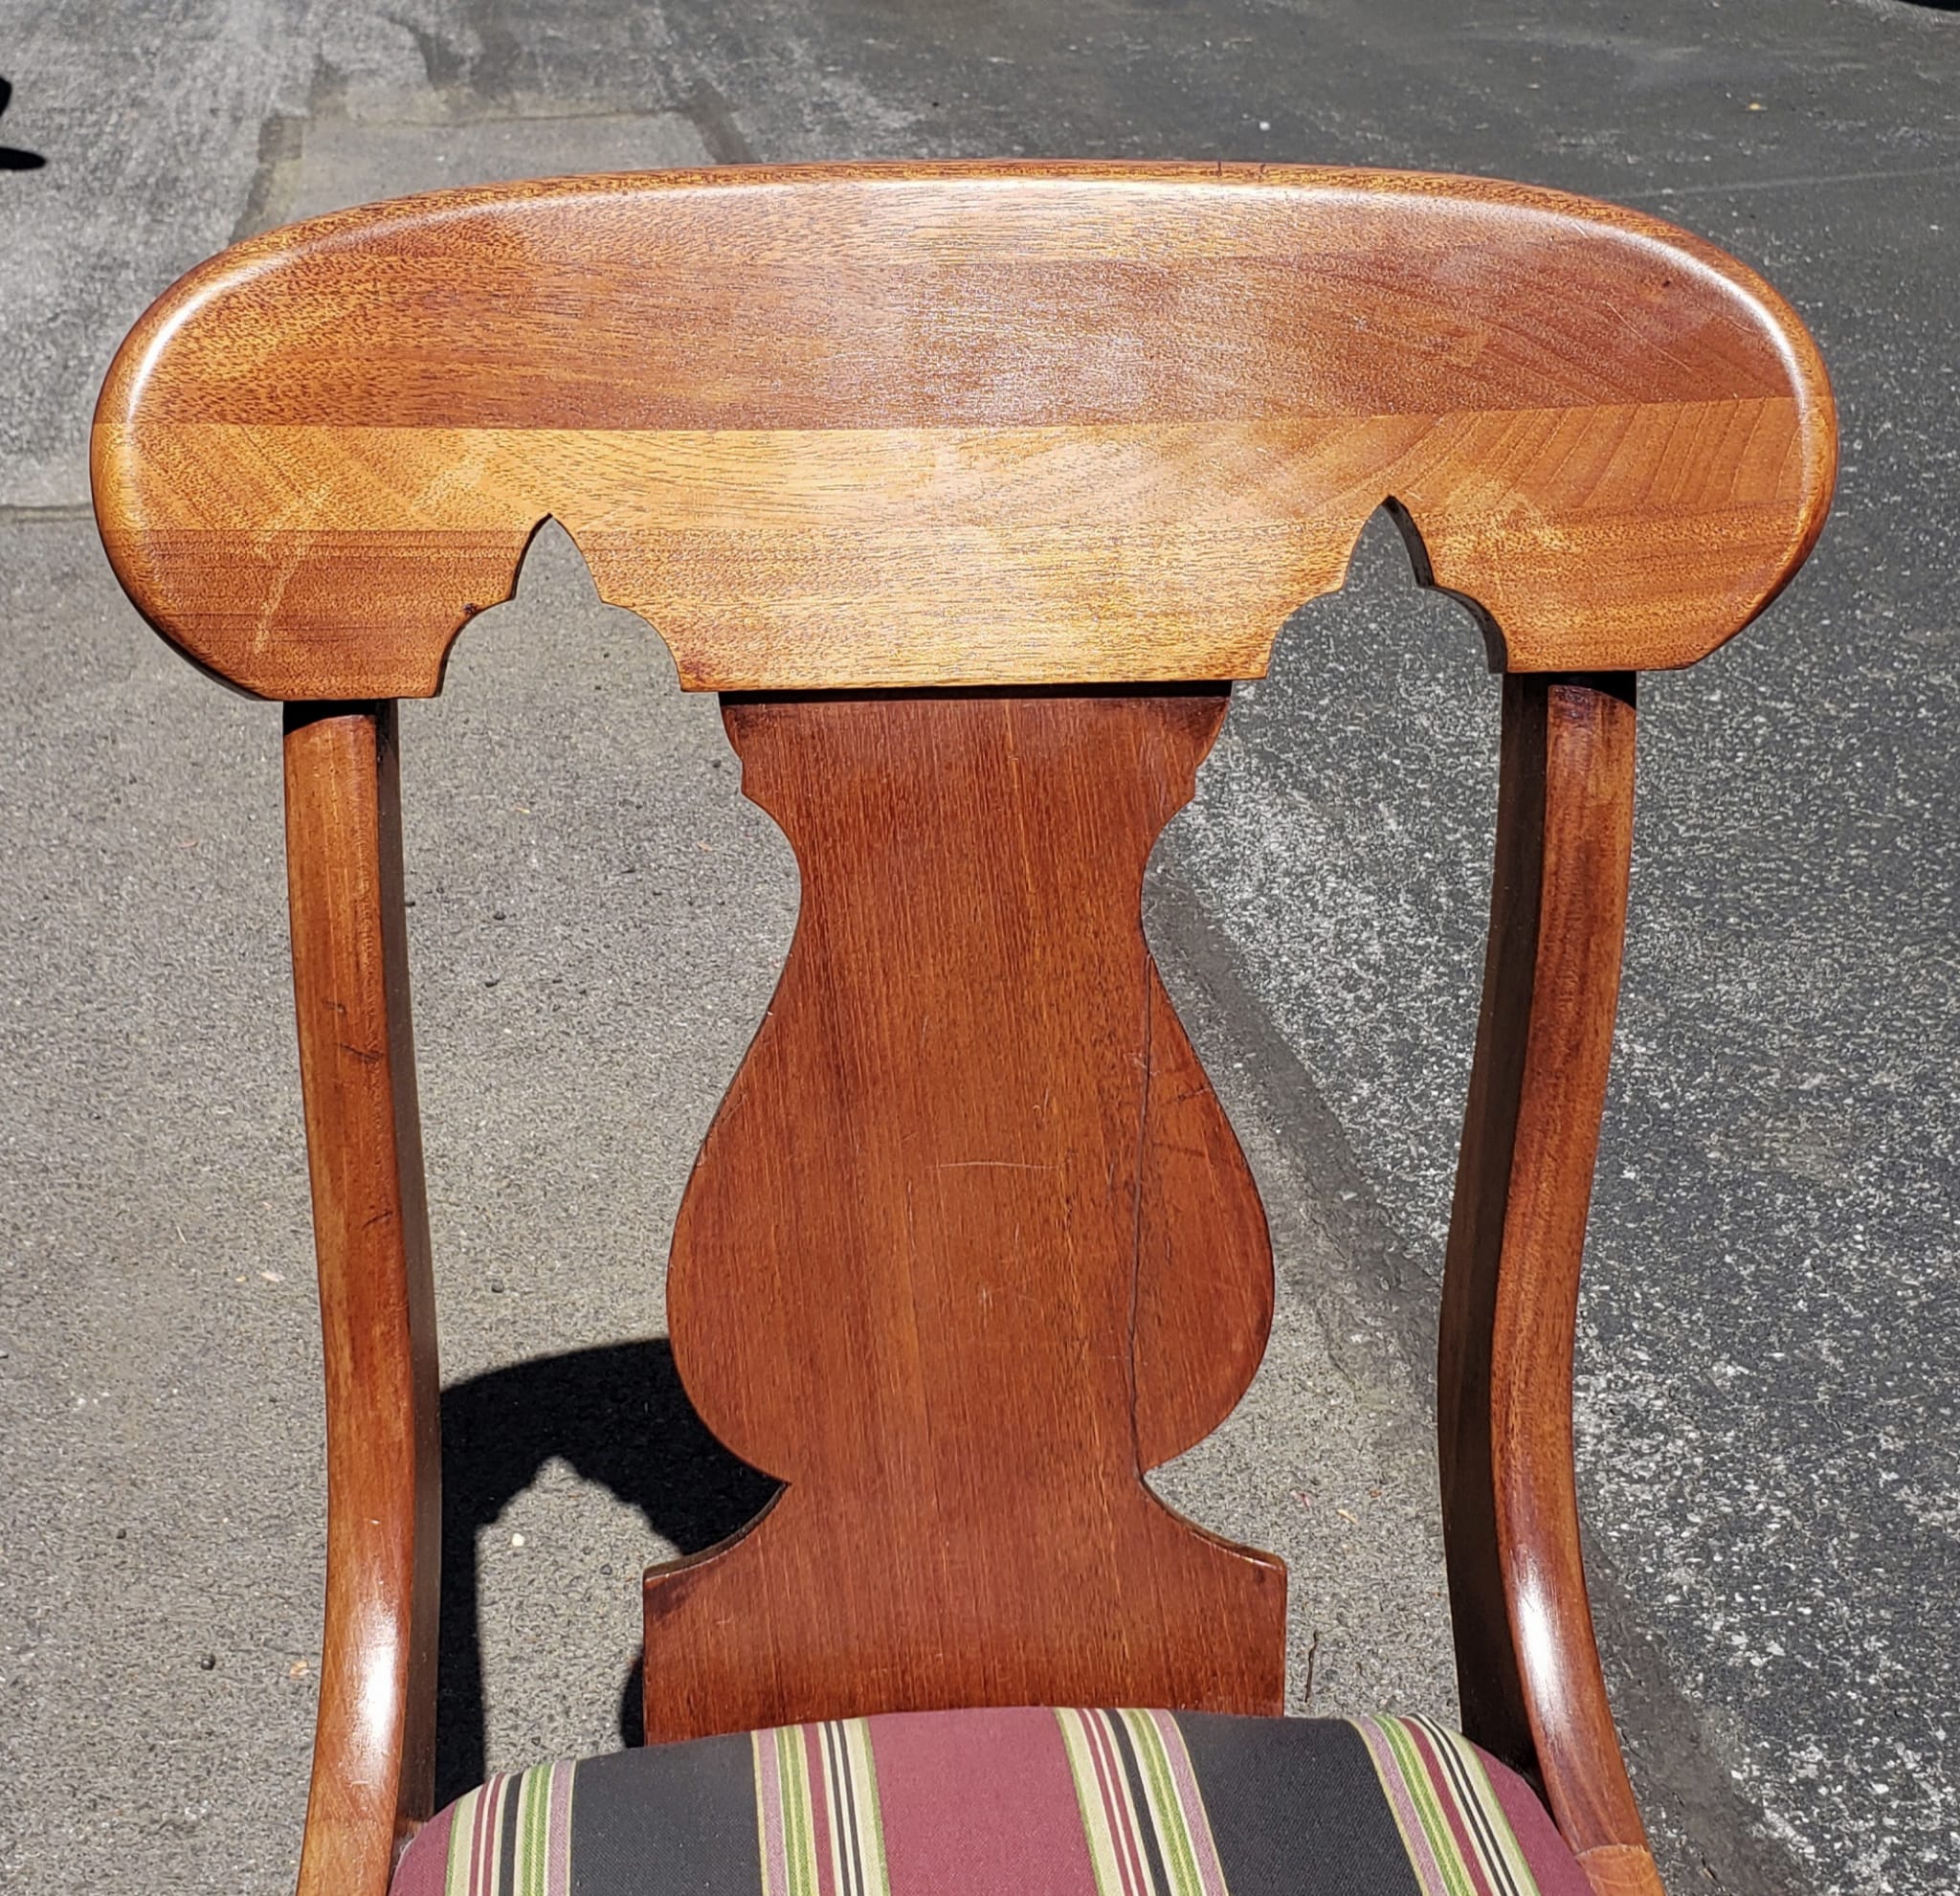 1930s Hickory Chair Empire Klismos Mahogany and Upholstered Seat Side Chairs For Sale 2